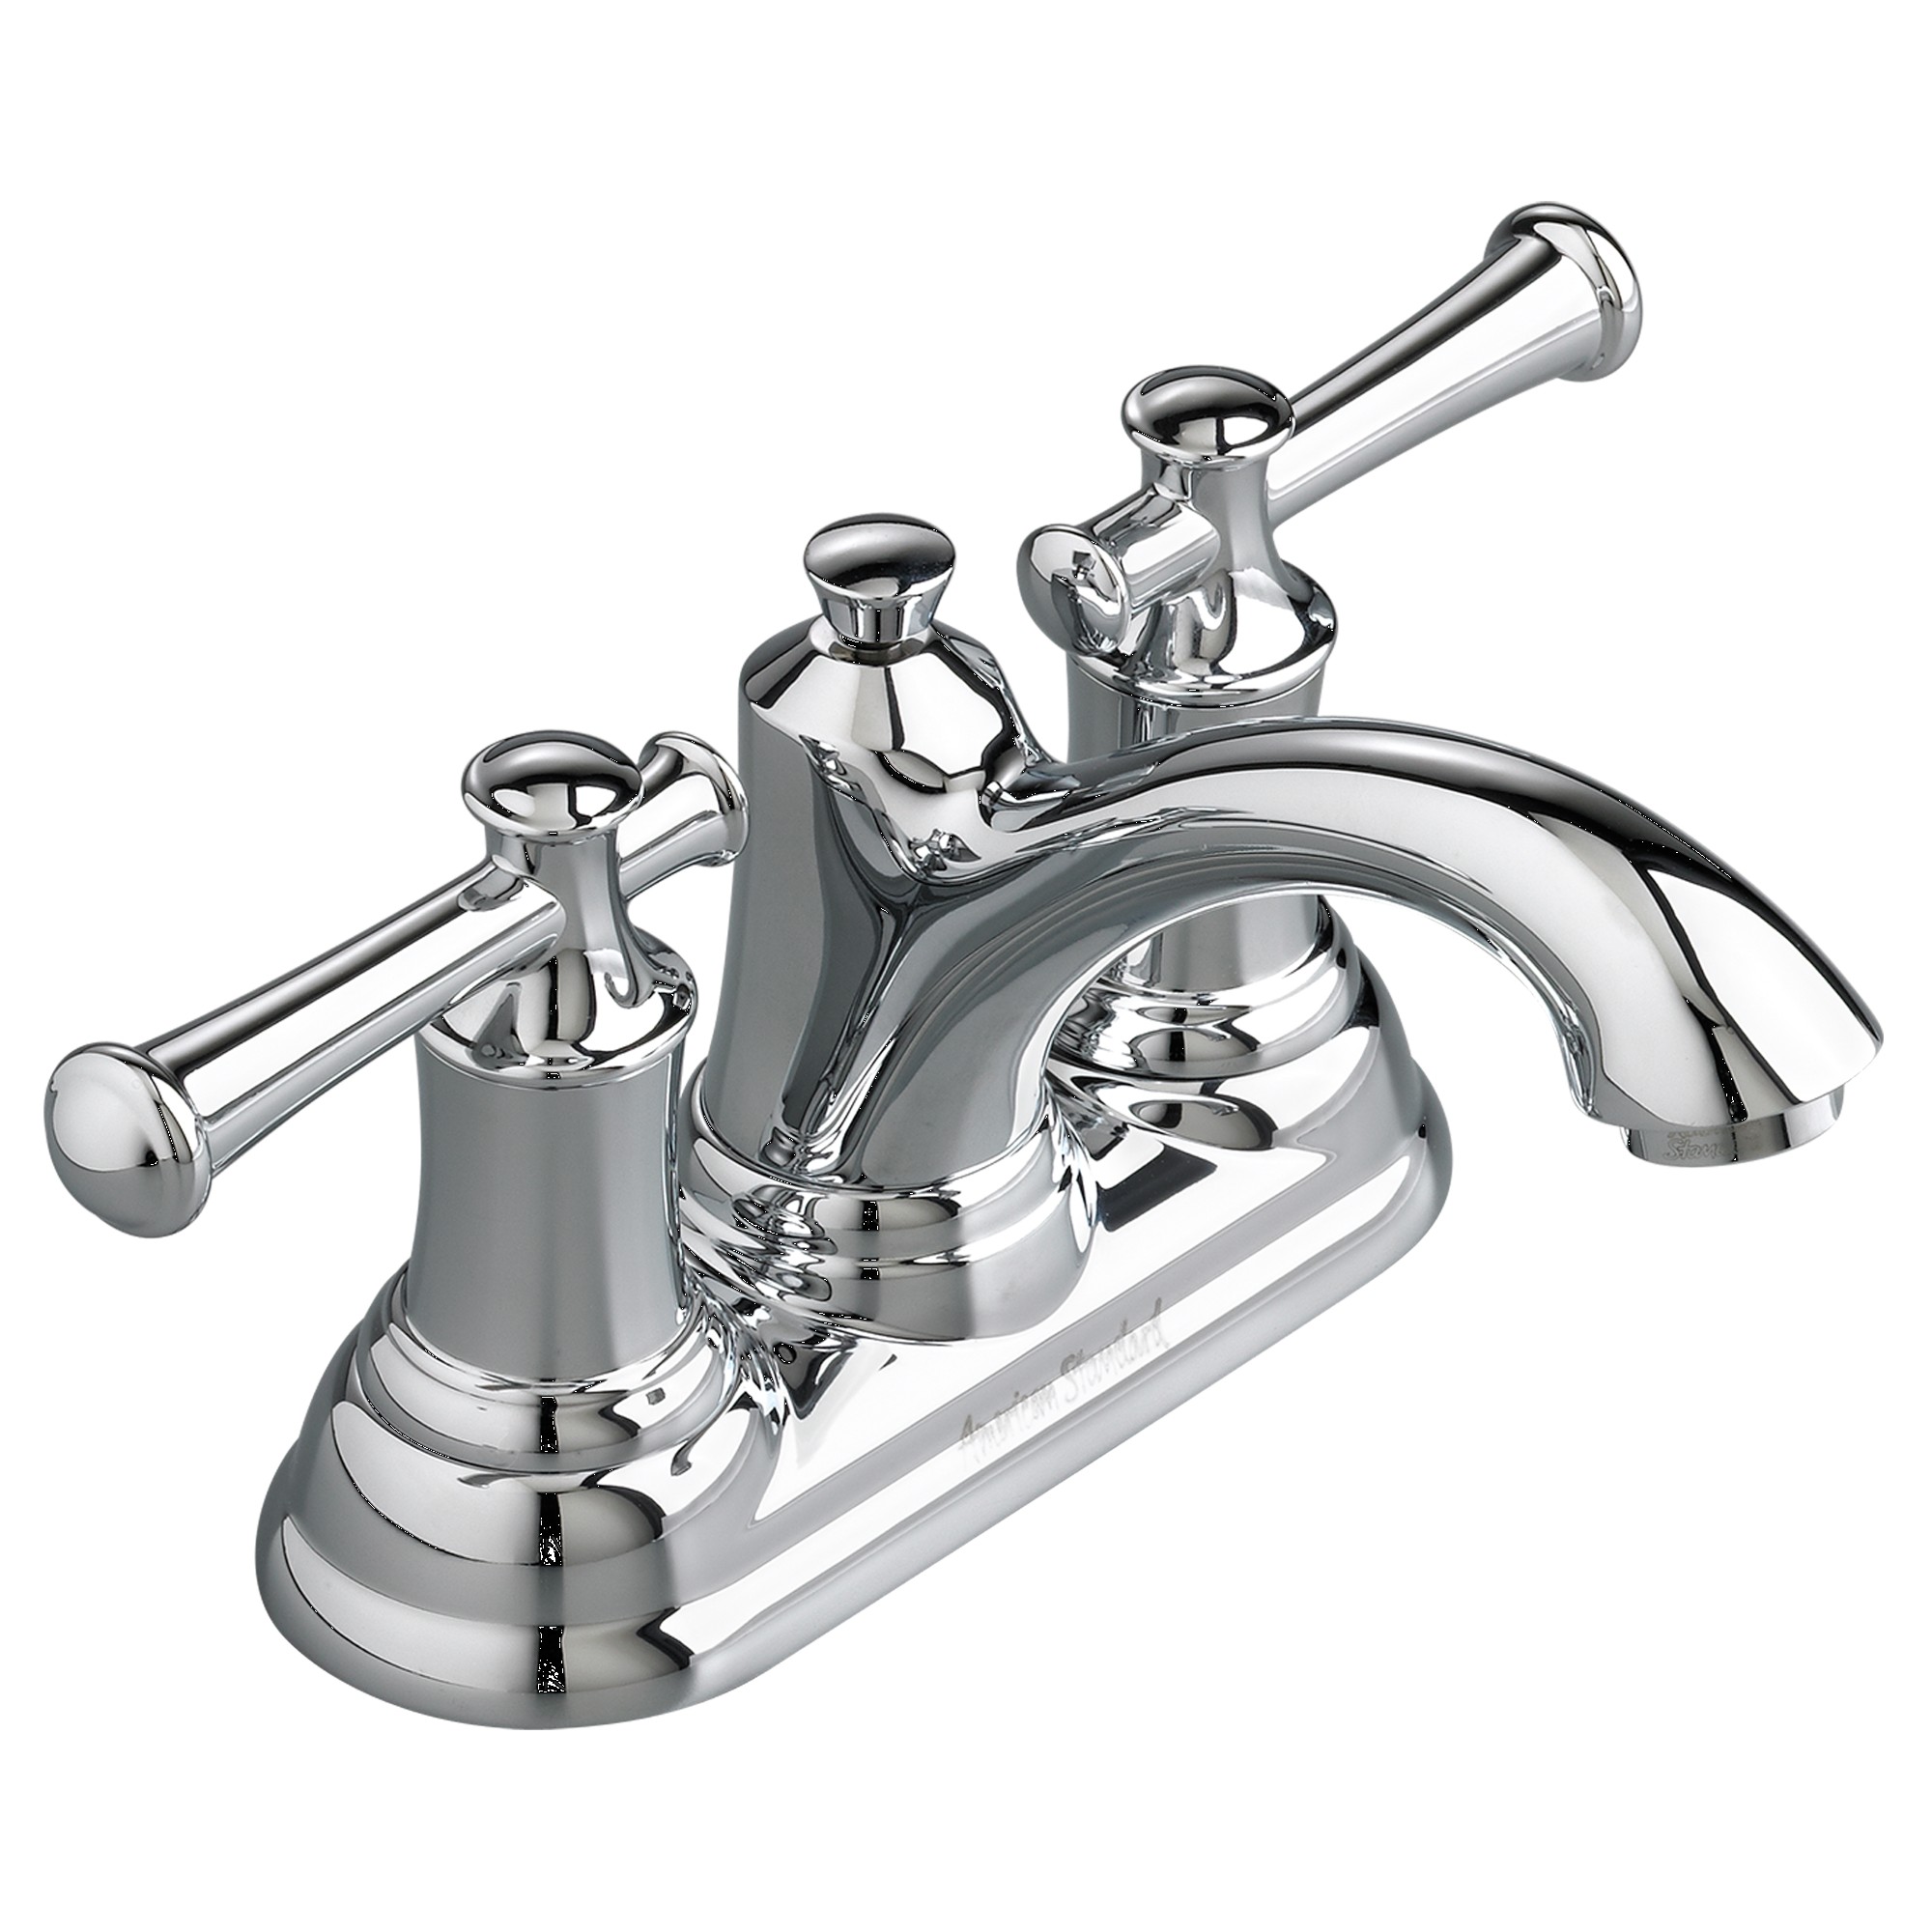 American Standard | 7415.201.002 | AMERICAN STANDARD 7415.201 PORTSMOUTH CENTERSET FAUCET CP 002 CHROME